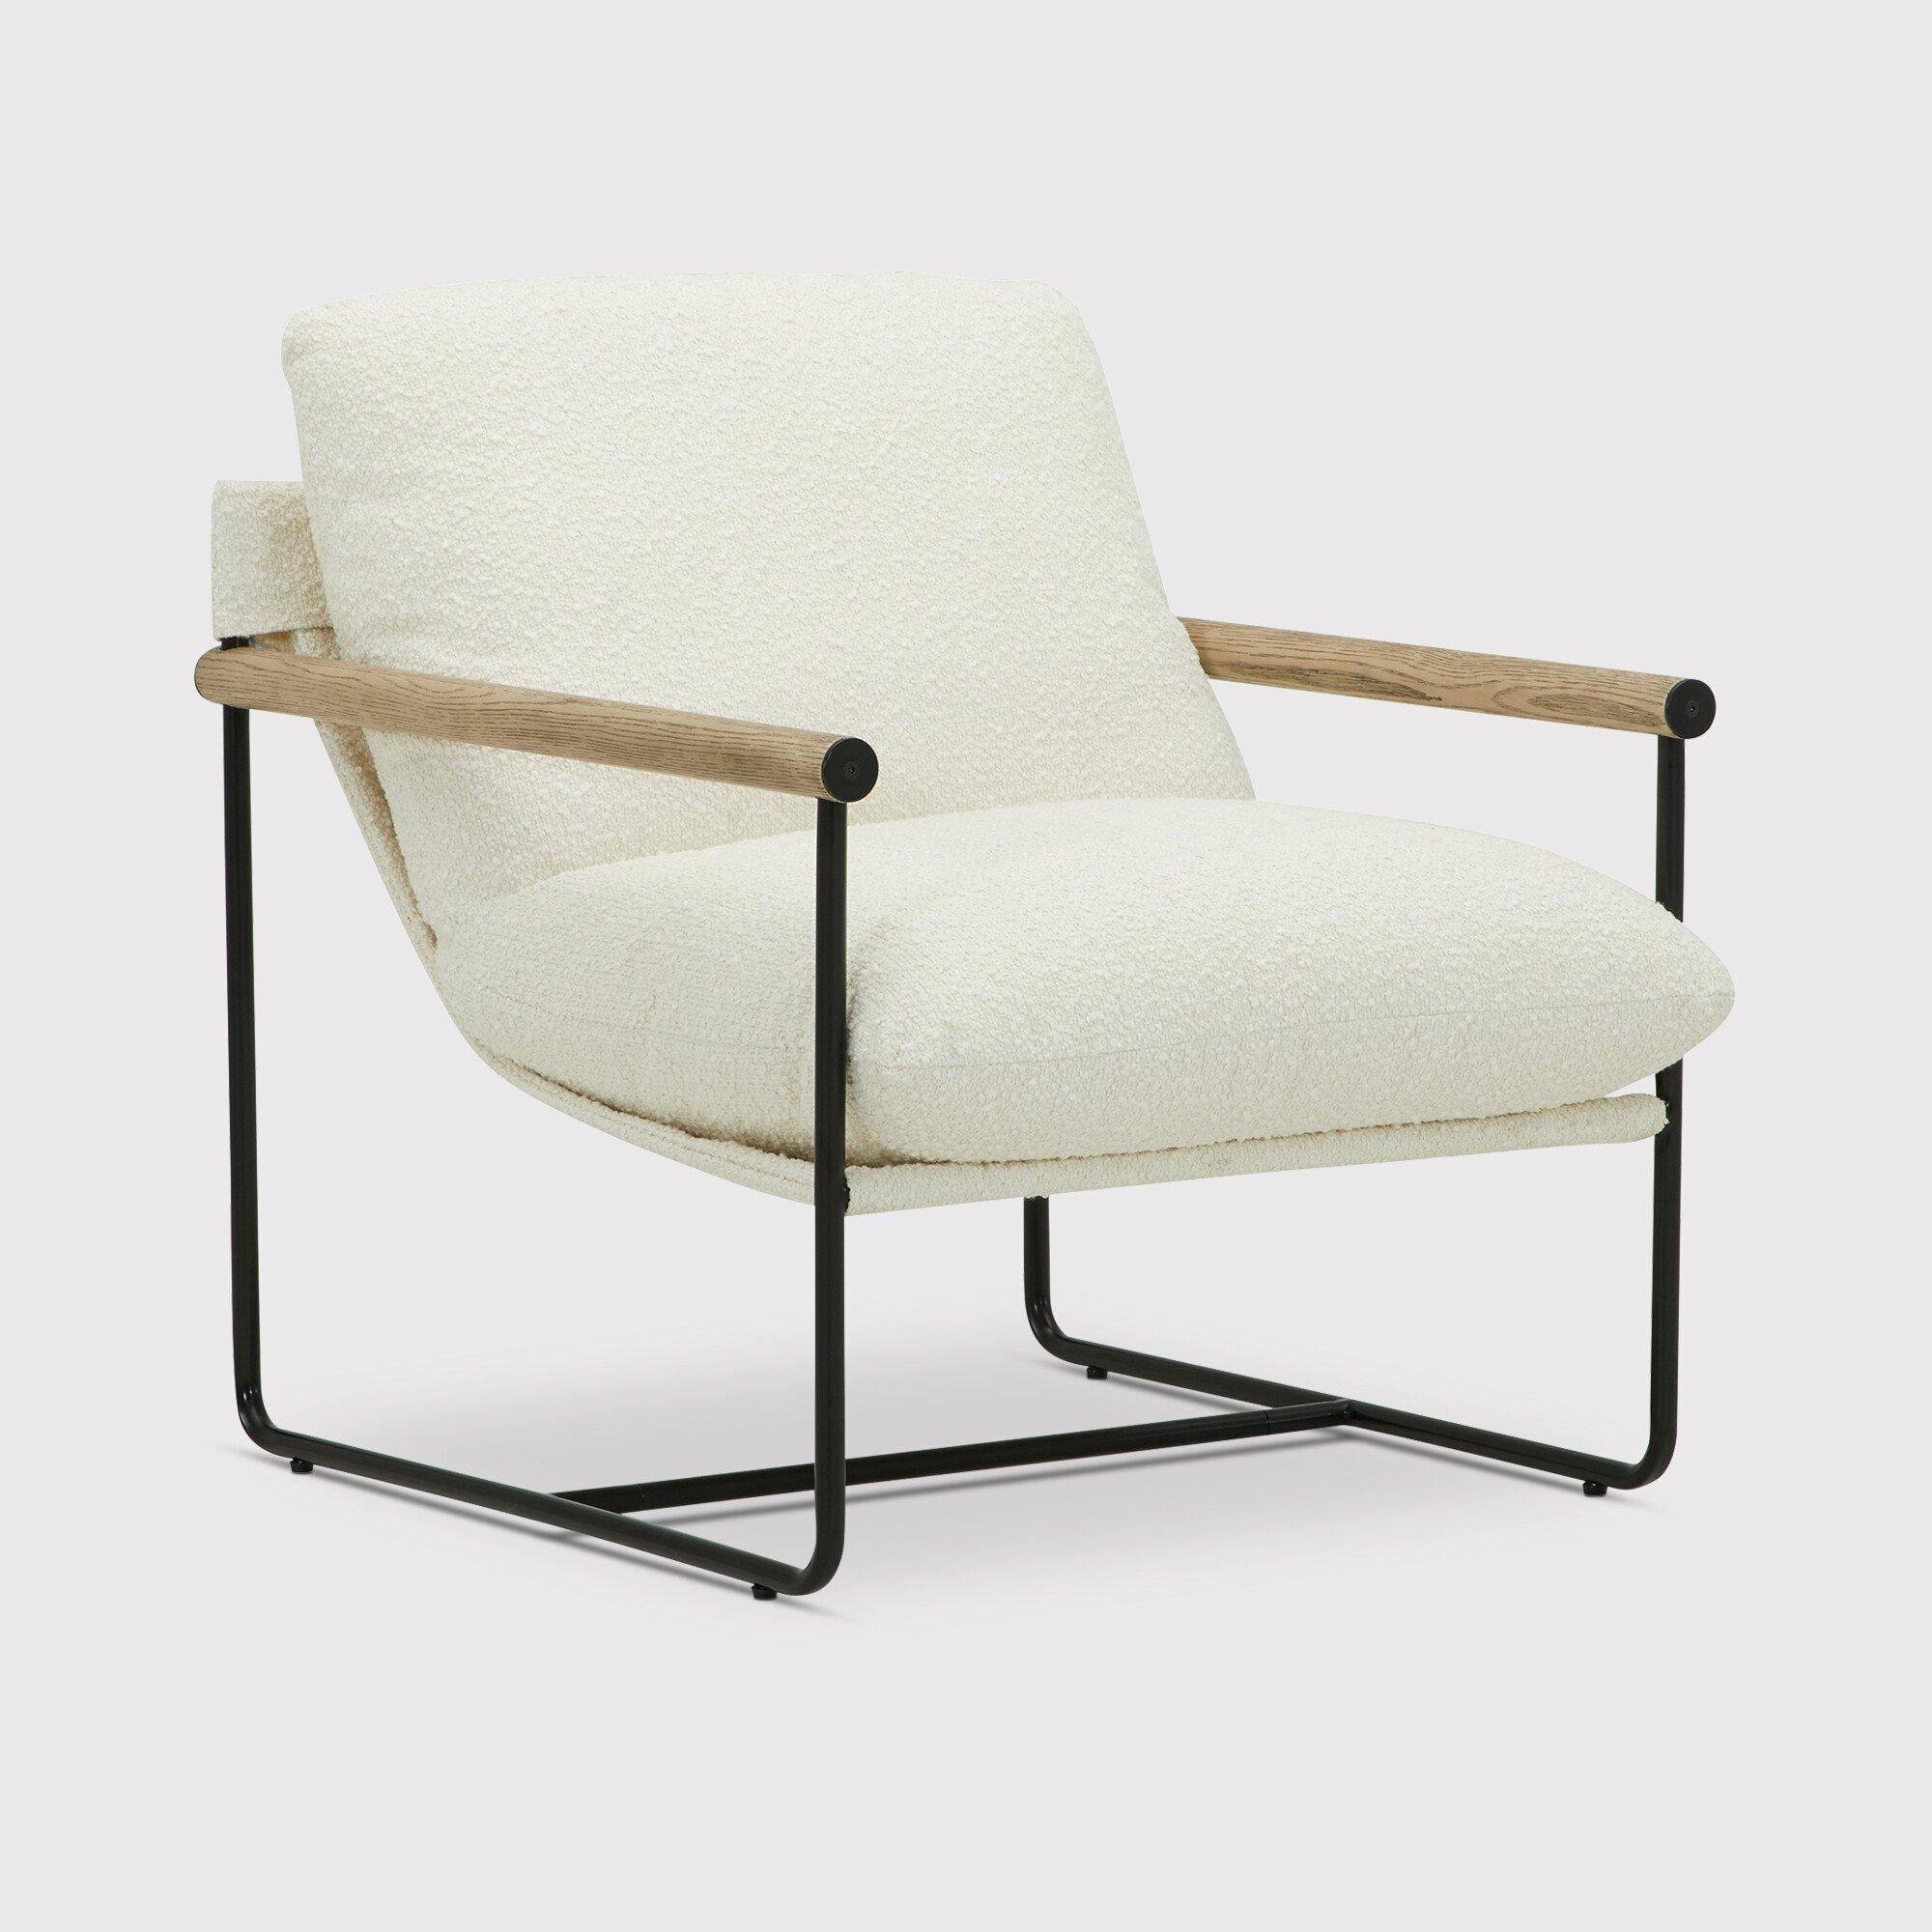 Whittaker Armchair, White Fabric - Barker & Stonehouse - image 1